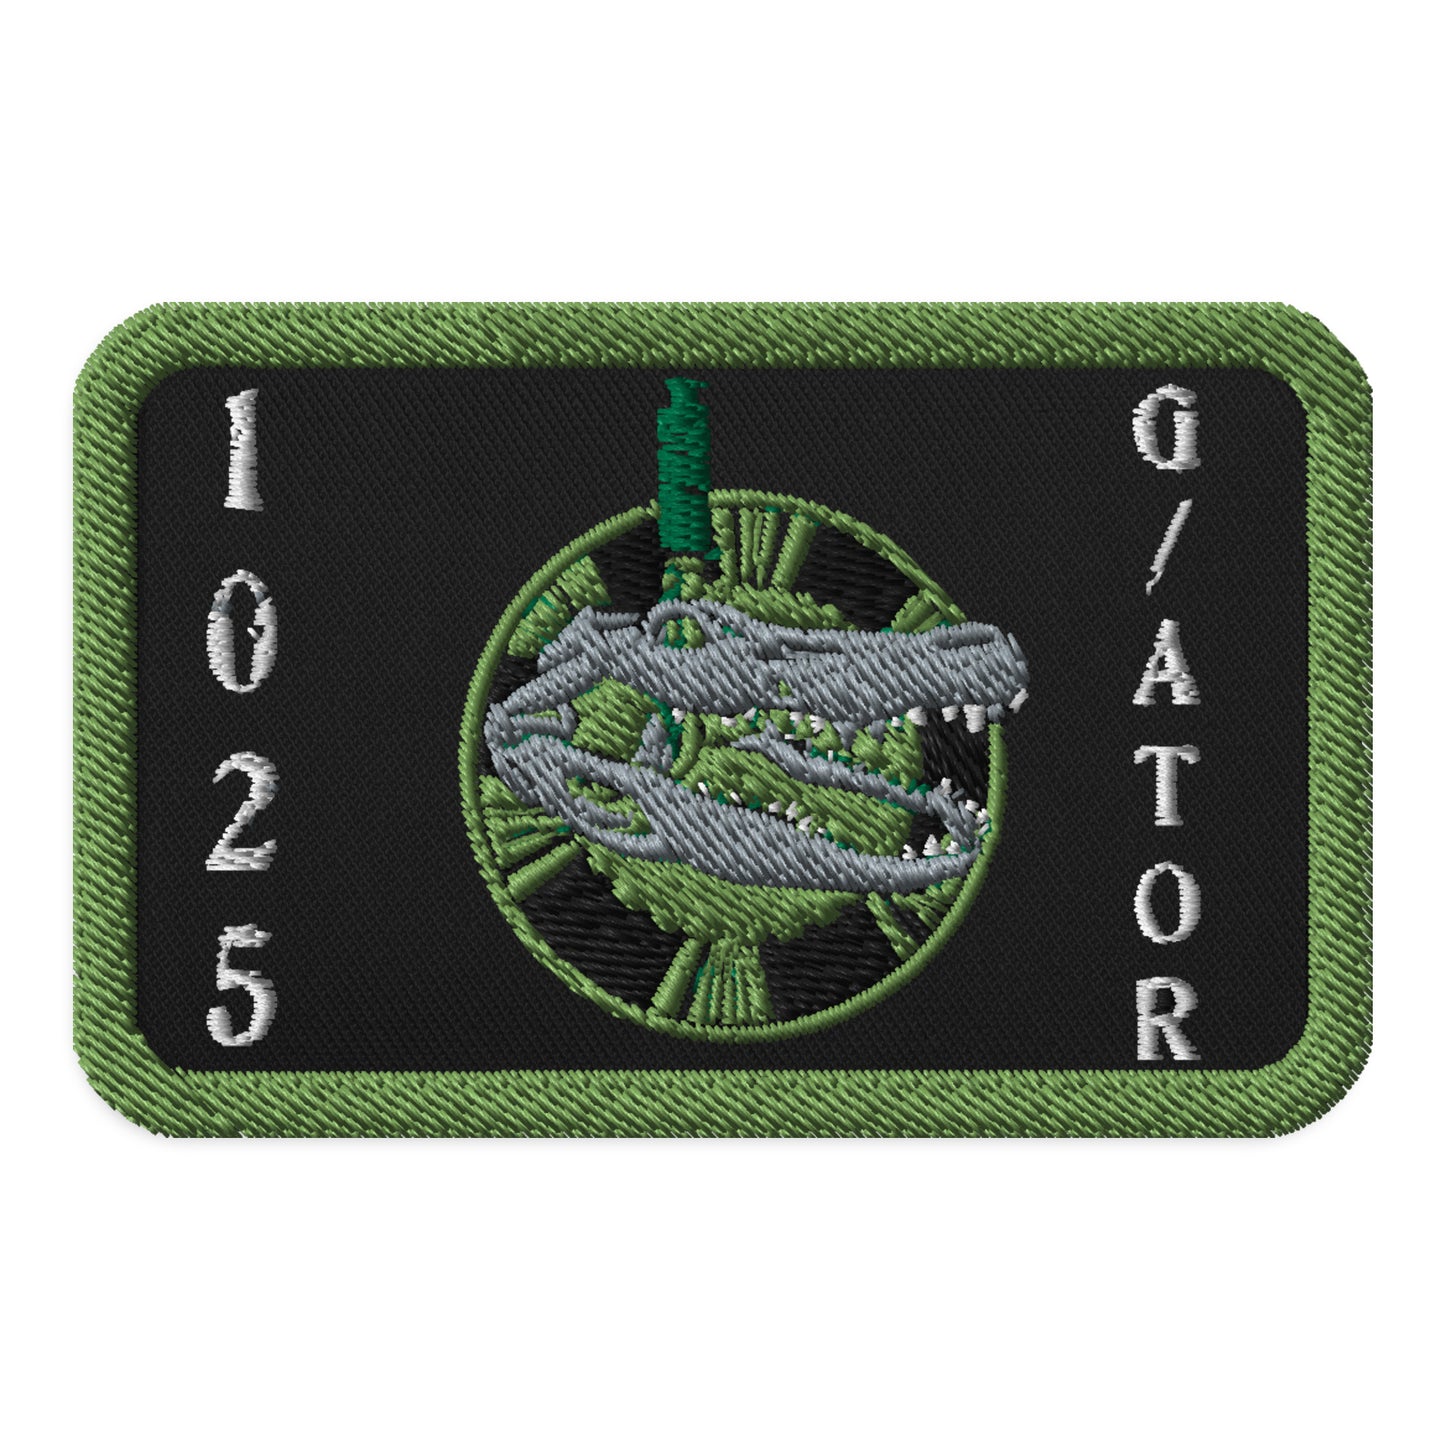 10th Marines CBR 1025 G/ATOR Embroidered Patch